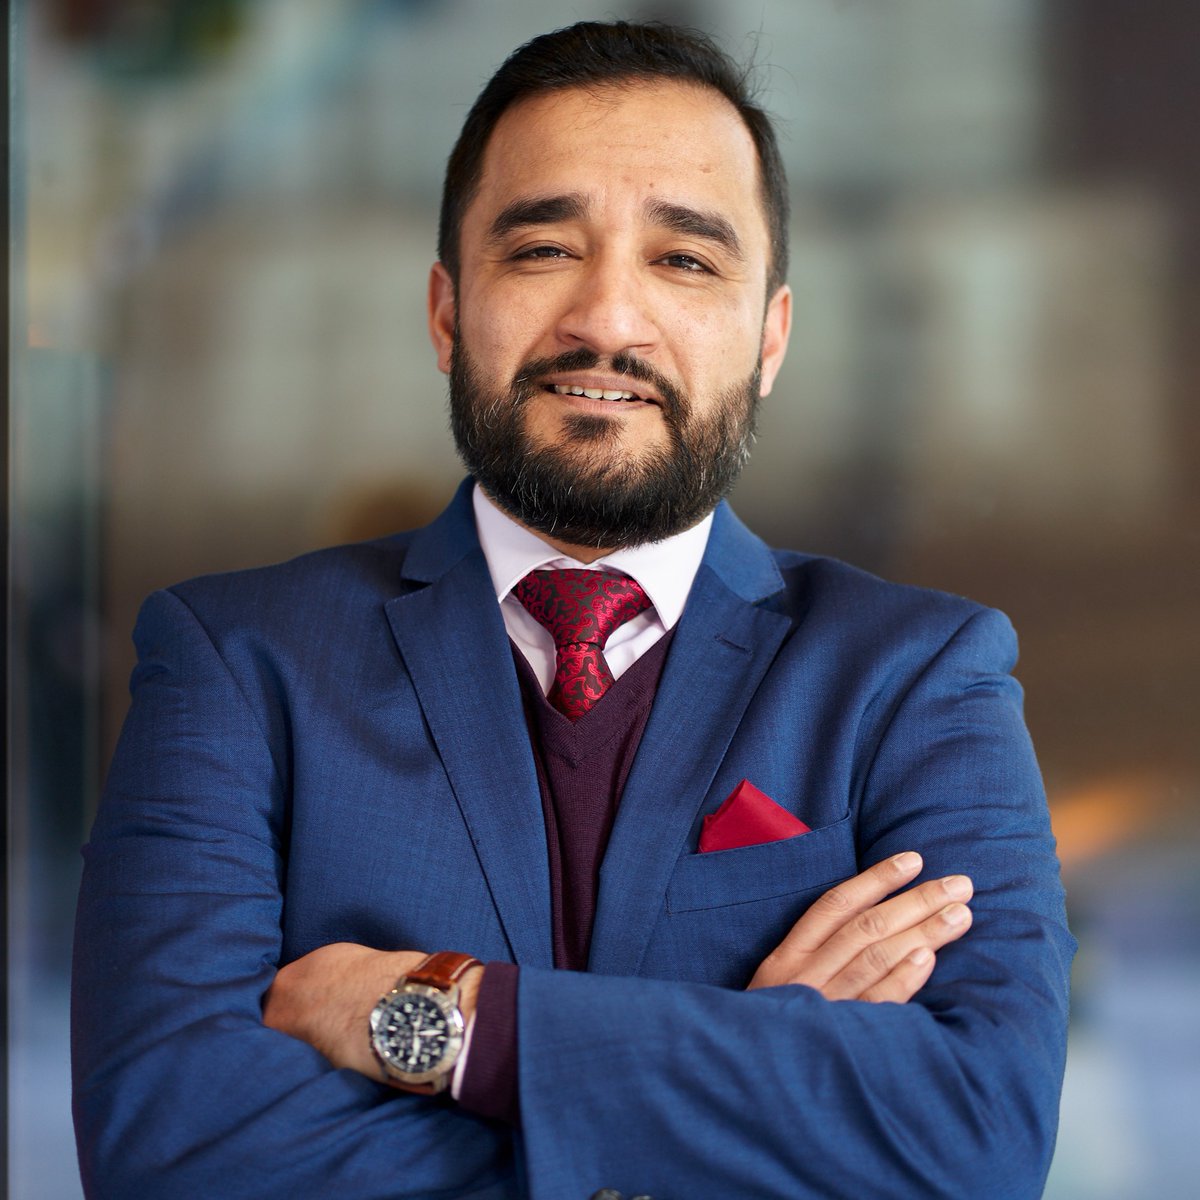 We are delighted to announce that the Business, Law and Finance Network is active again! On 31st August, alumnus Asim Khwaja (2003) will deliver a fascinating and free talk on ‘Demystifying Technology and Cyber Challenges in the Corporate World’ -linacre.ox.ac.uk/about/events/d…